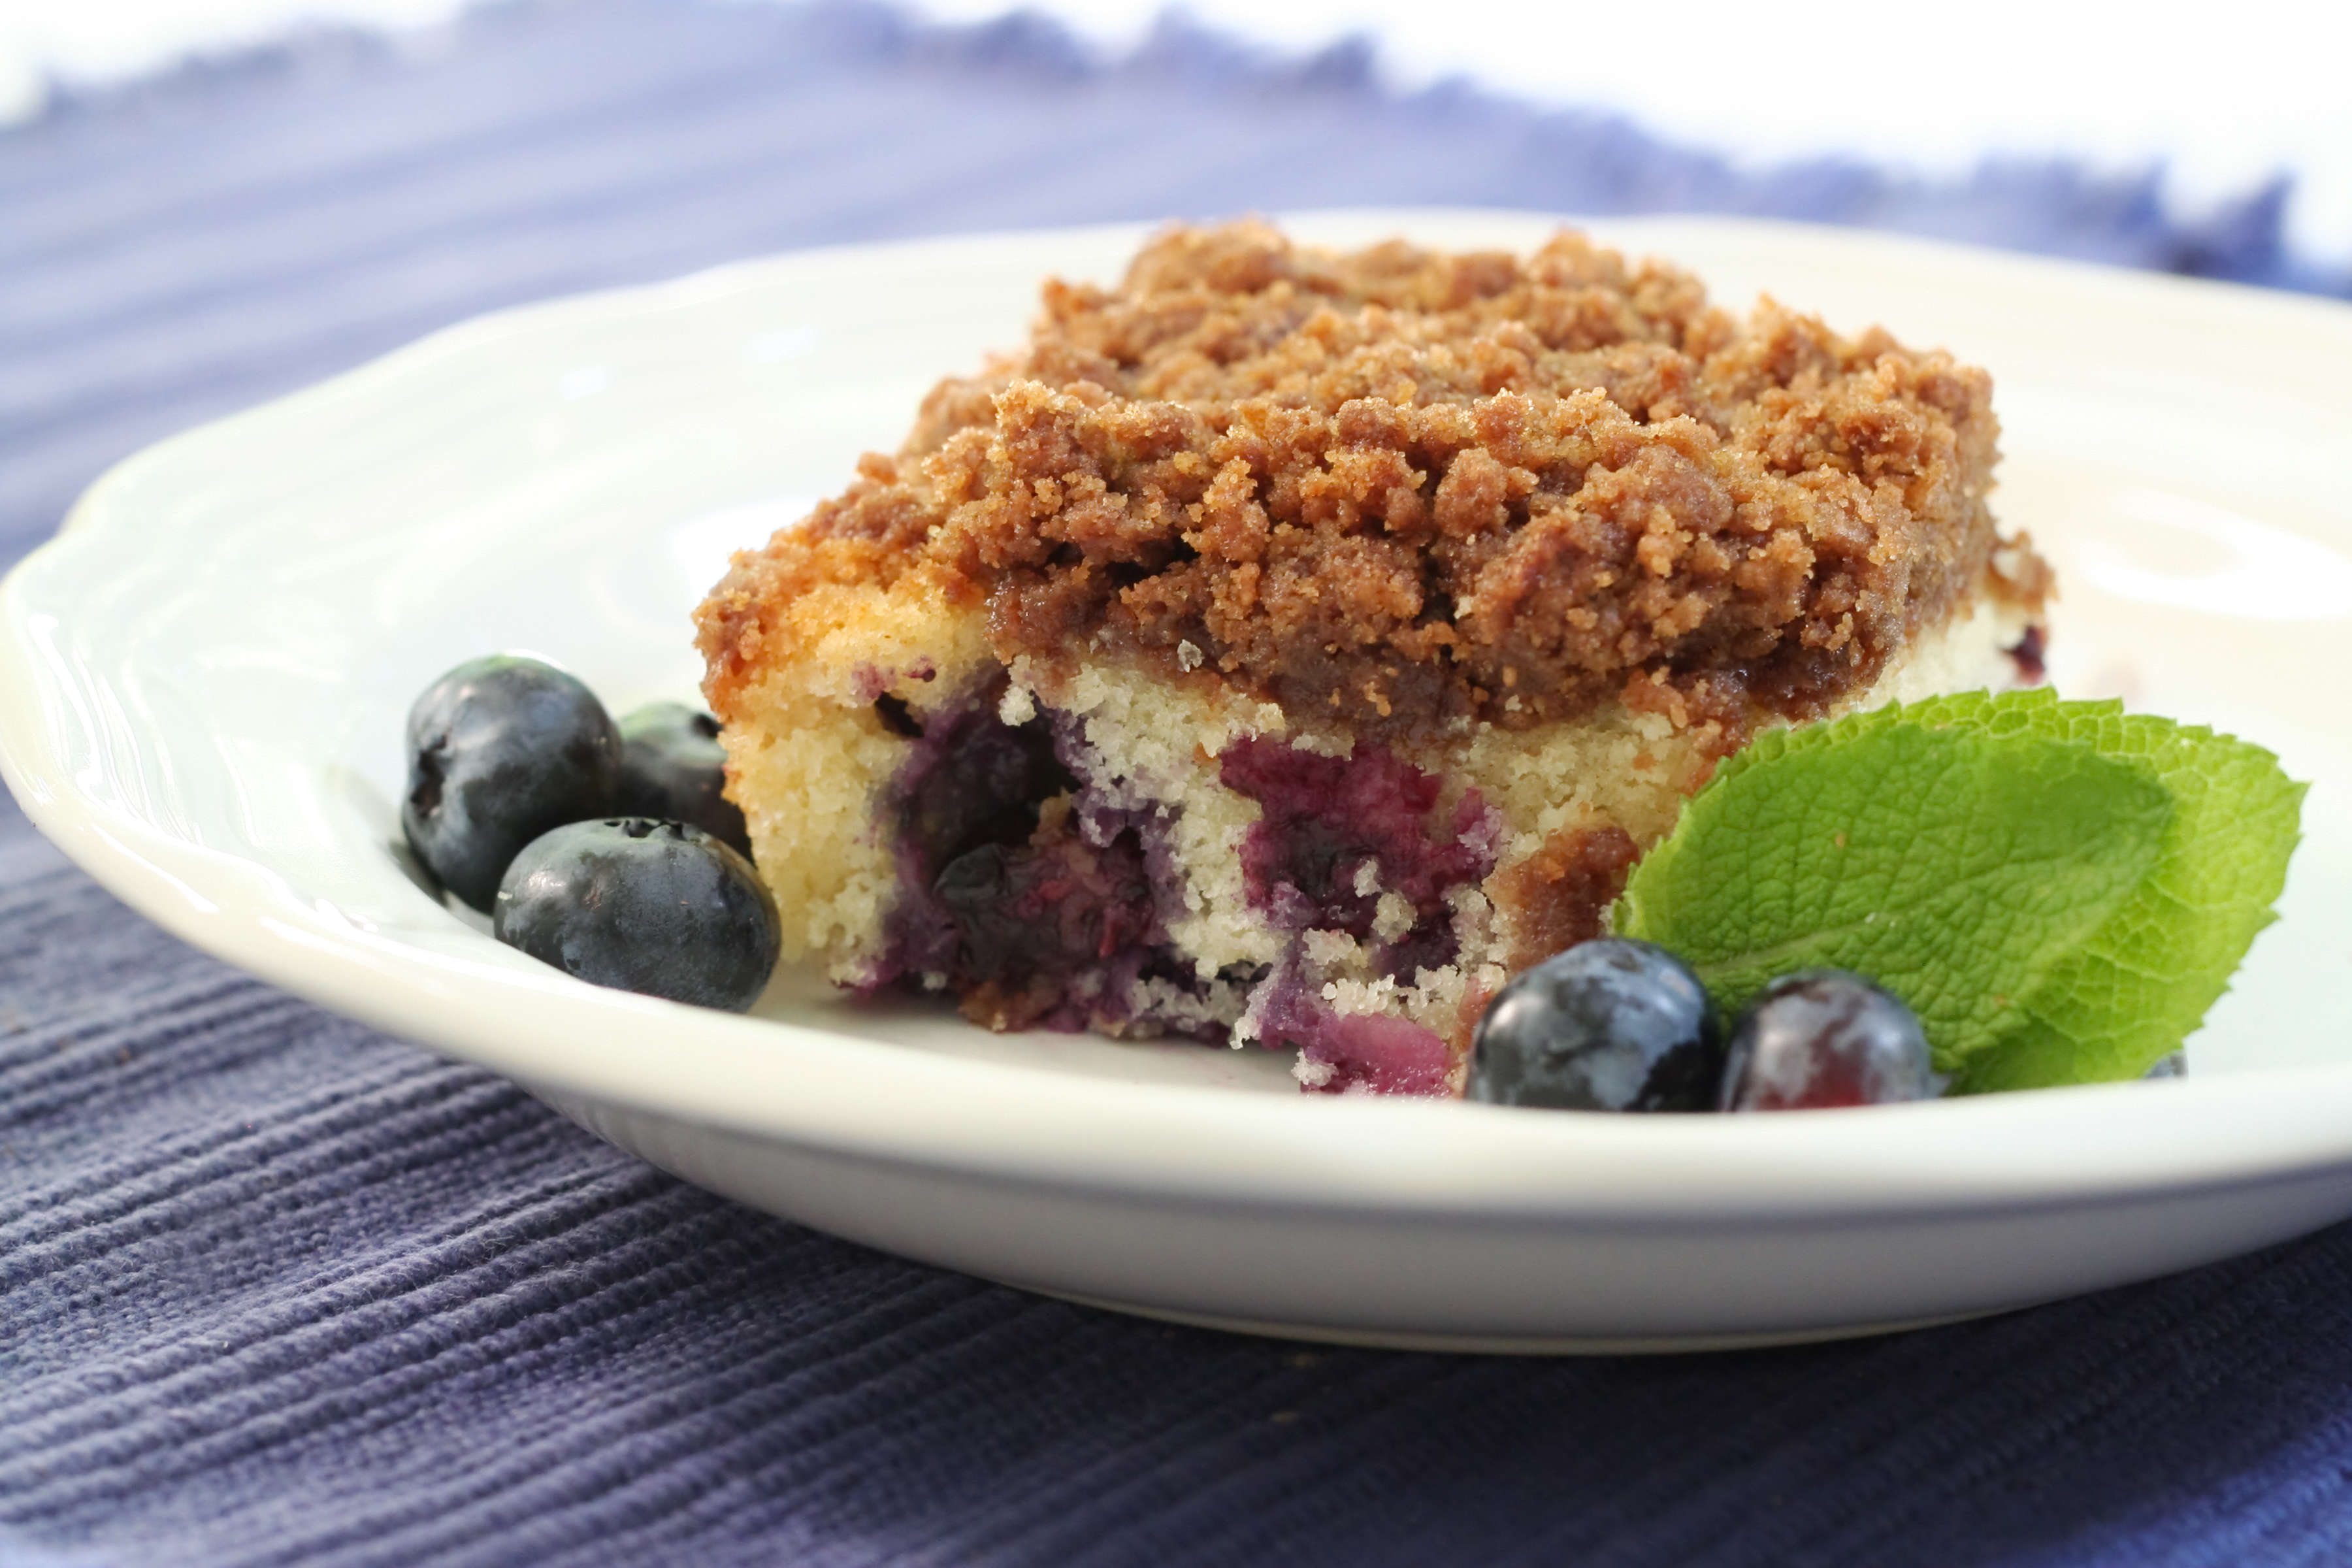 Serving of blueberry buckle cake in a bowl served with fresh blueberries.